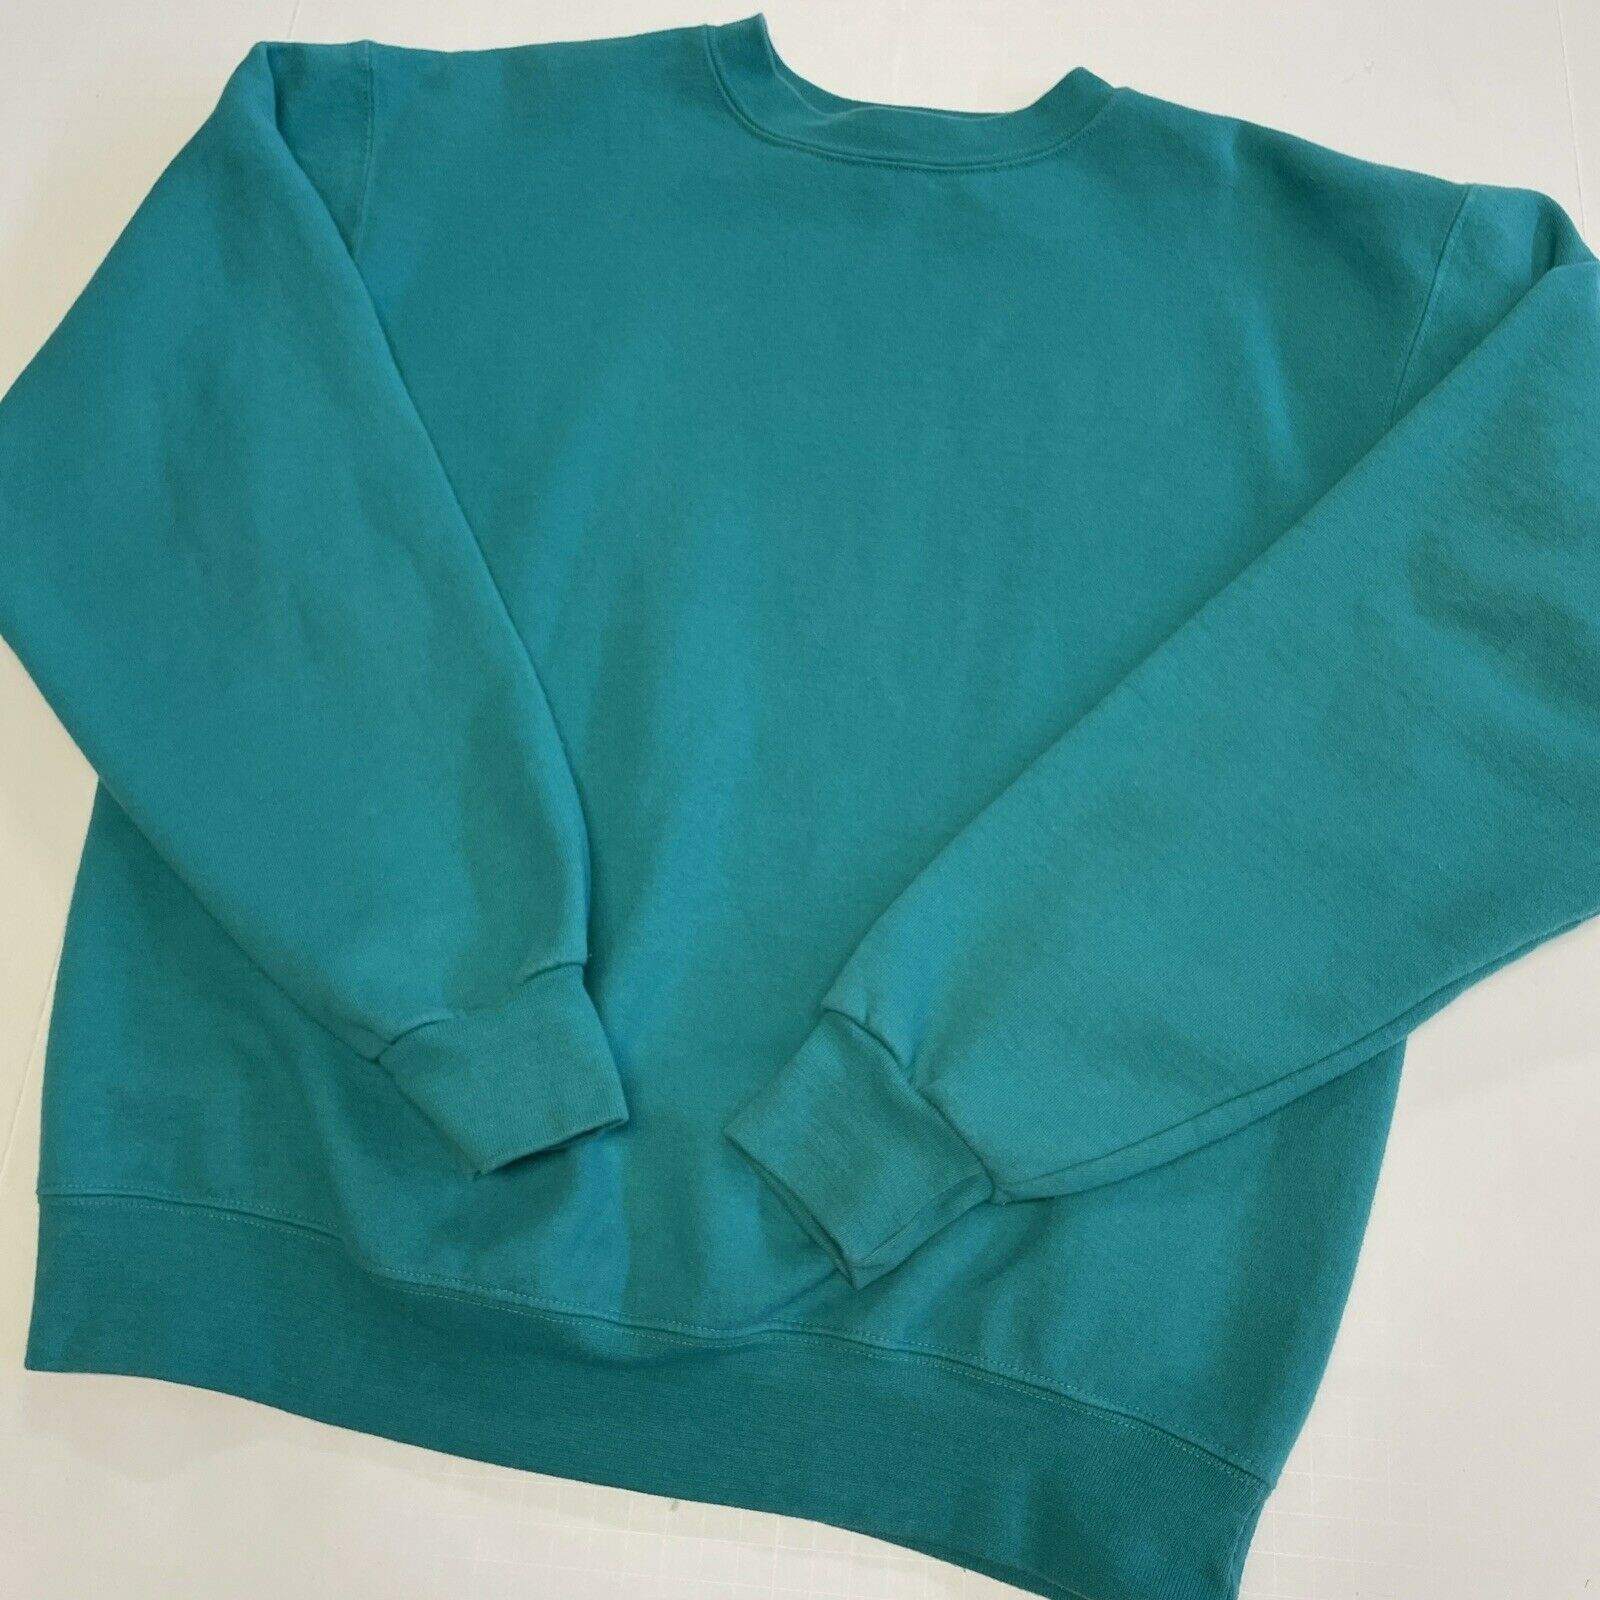 Champion Champion ECO Blank Pullover Sweatshirt Solid Teal Stained M Size US M / EU 48-50 / 2 - 6 Thumbnail